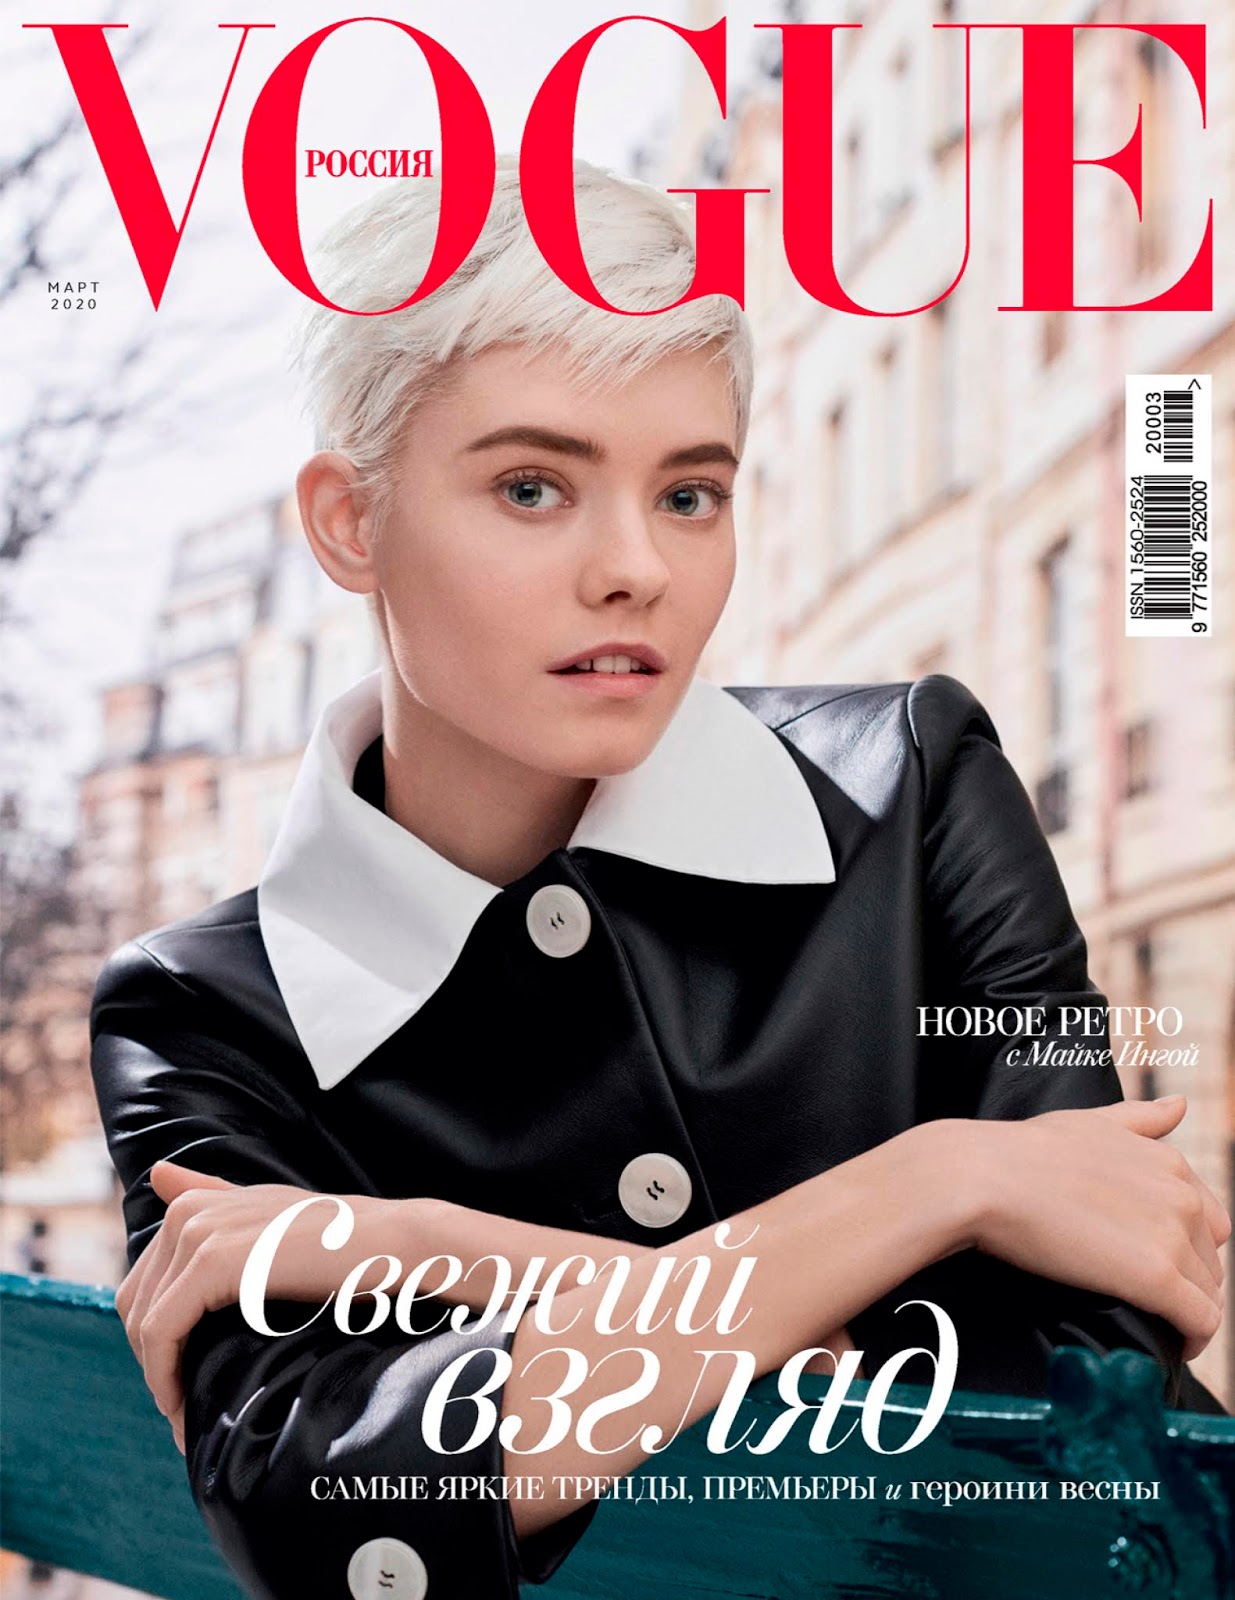 Vogue Russia March 2020 (Maike Inga) Cover Story Editorial